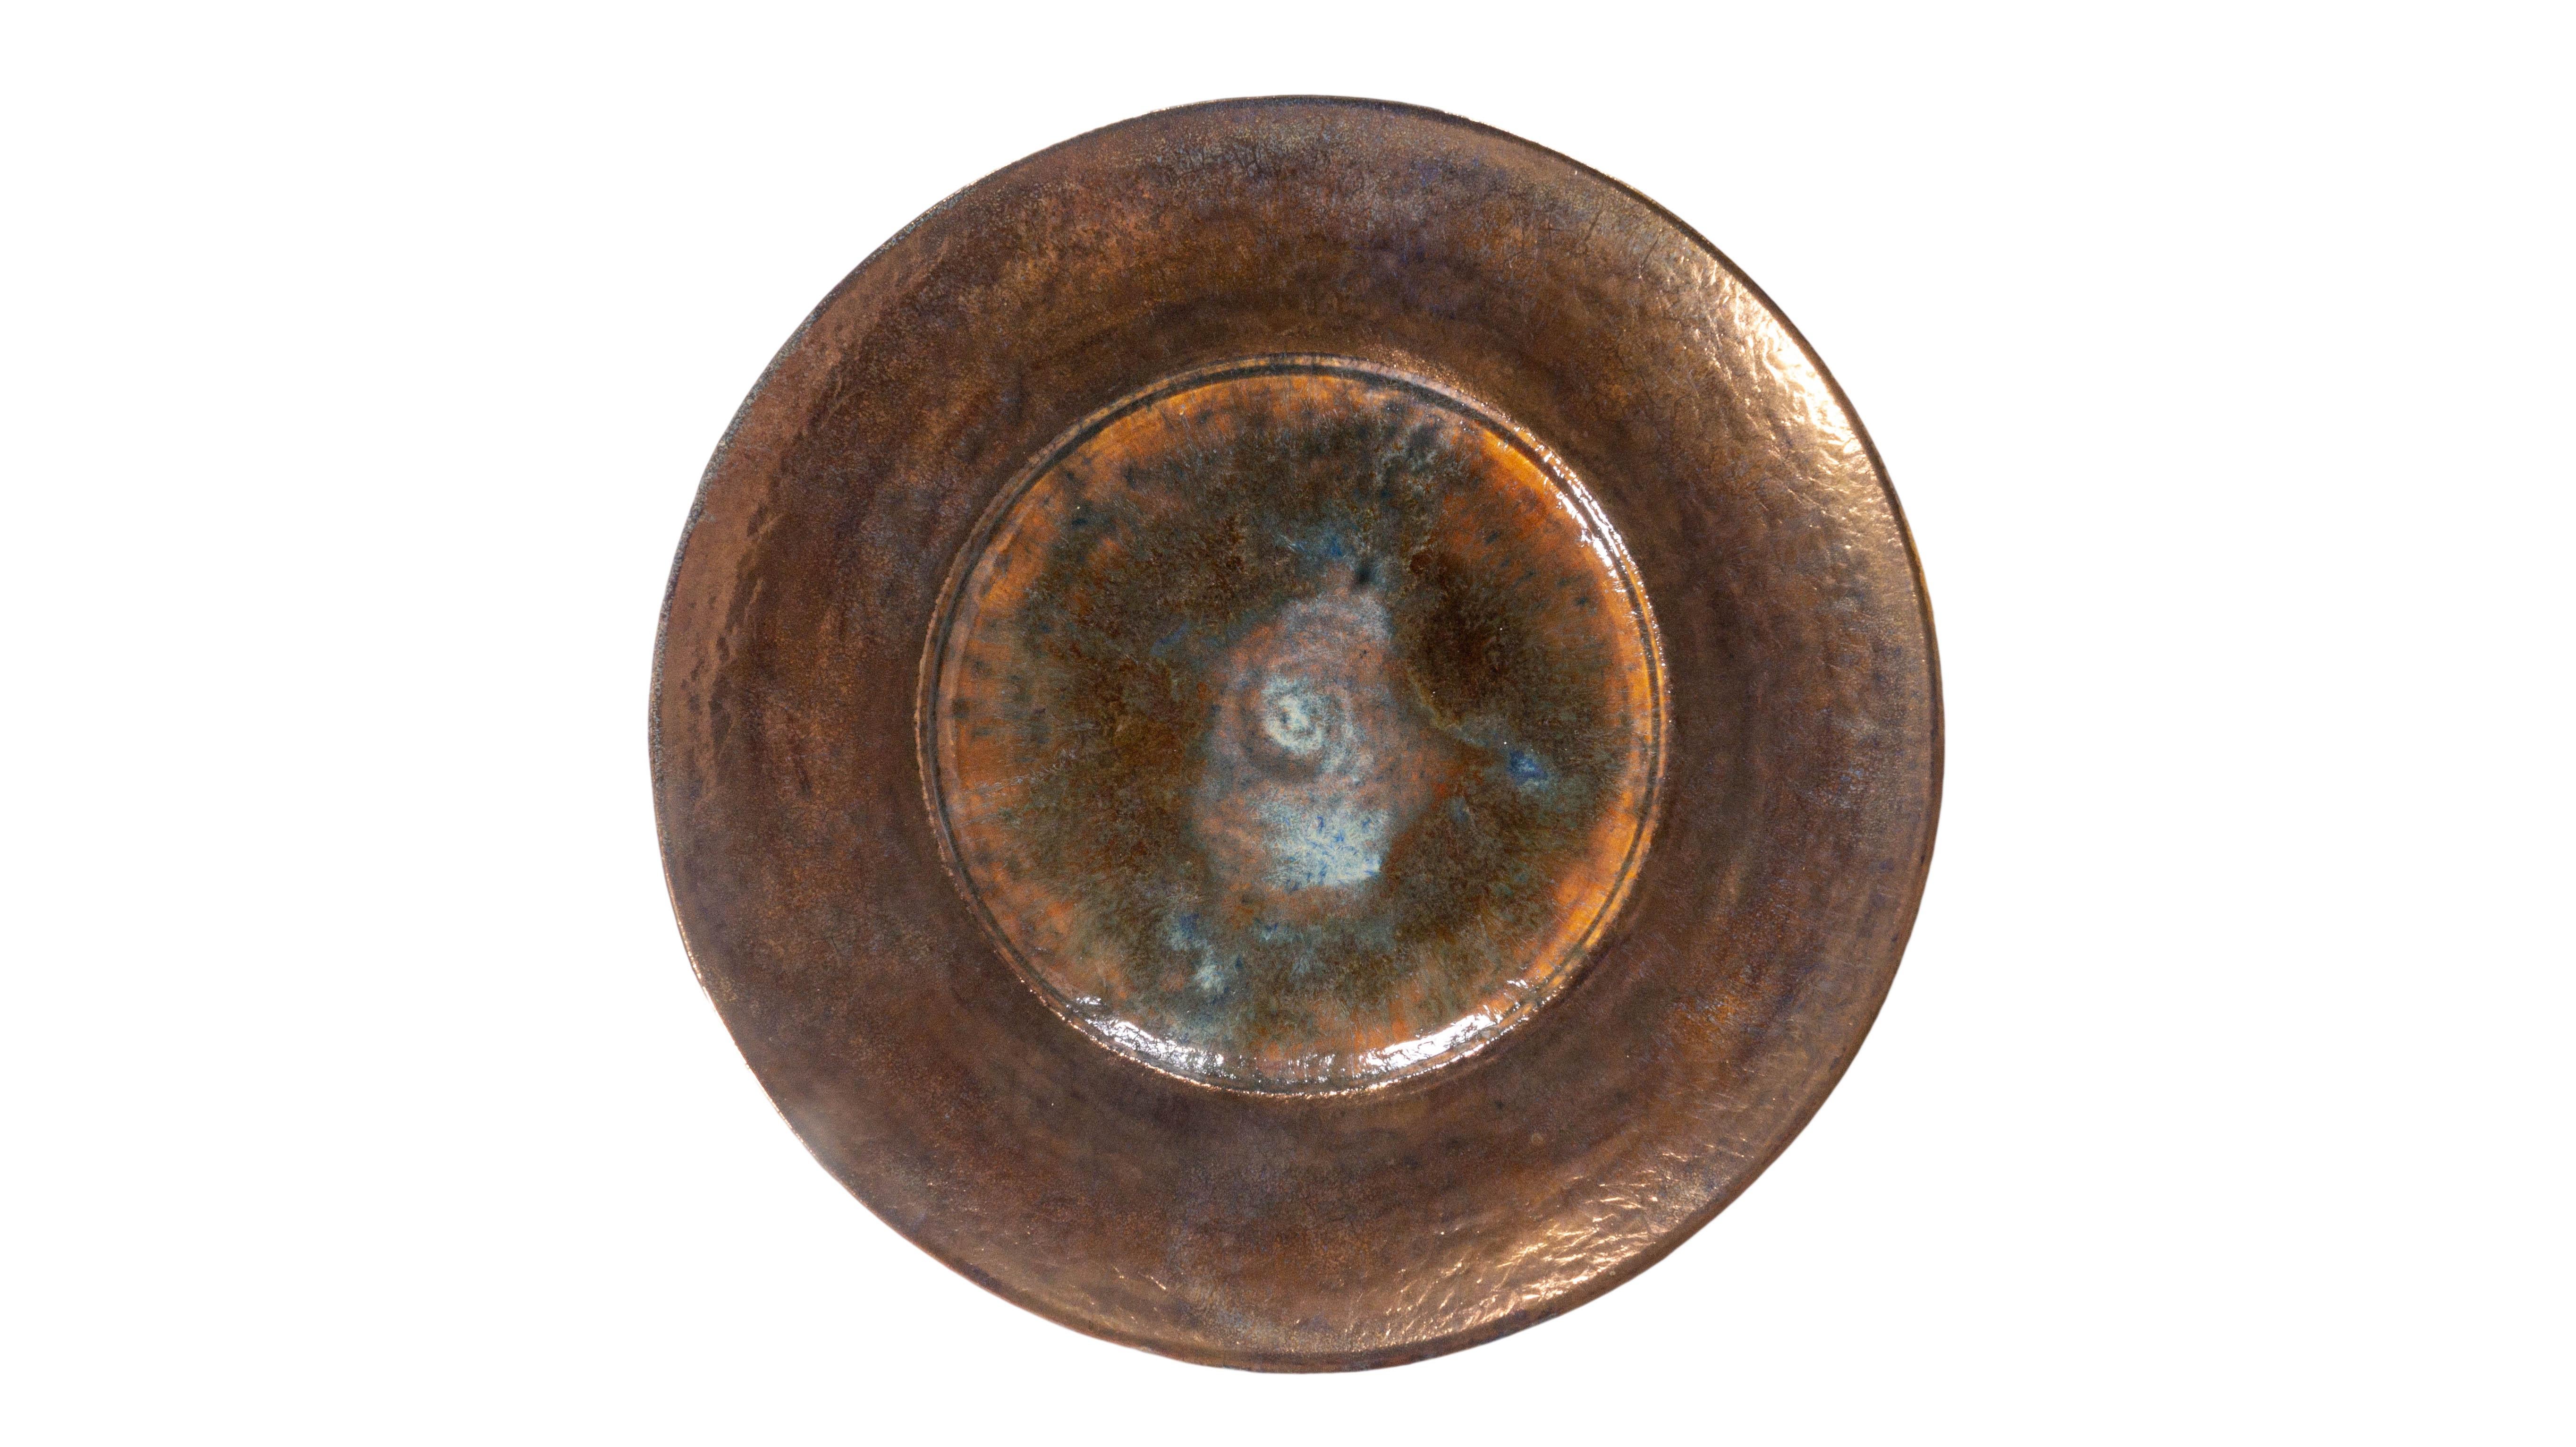 This monumental studio art pottery charger is artfully lustre- galzed and features beautiful oxidized blues. The hand thrown ceramic piece is one of a kind and makes a beautiful piece to display alone or with a collection. 

This piece is a part